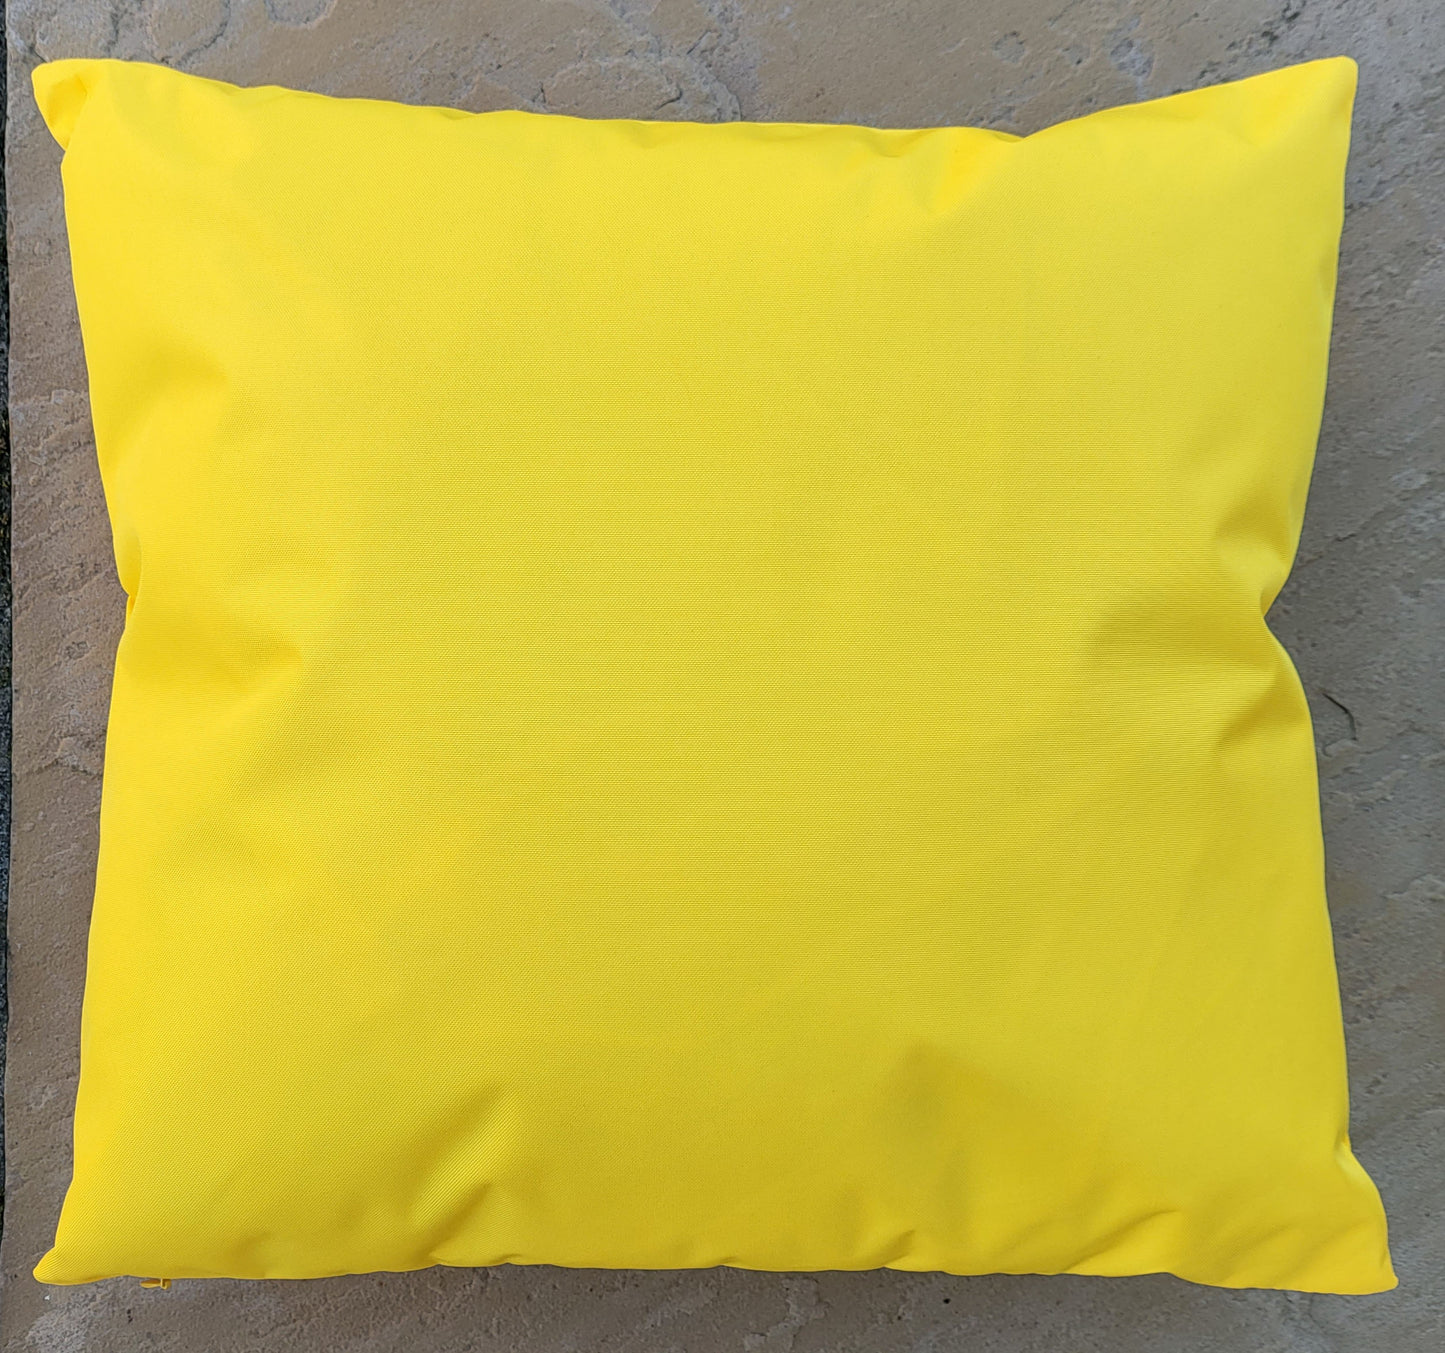 Outdoor Waterproof Garden Rattan Chair Cushions Or Covers Yellow